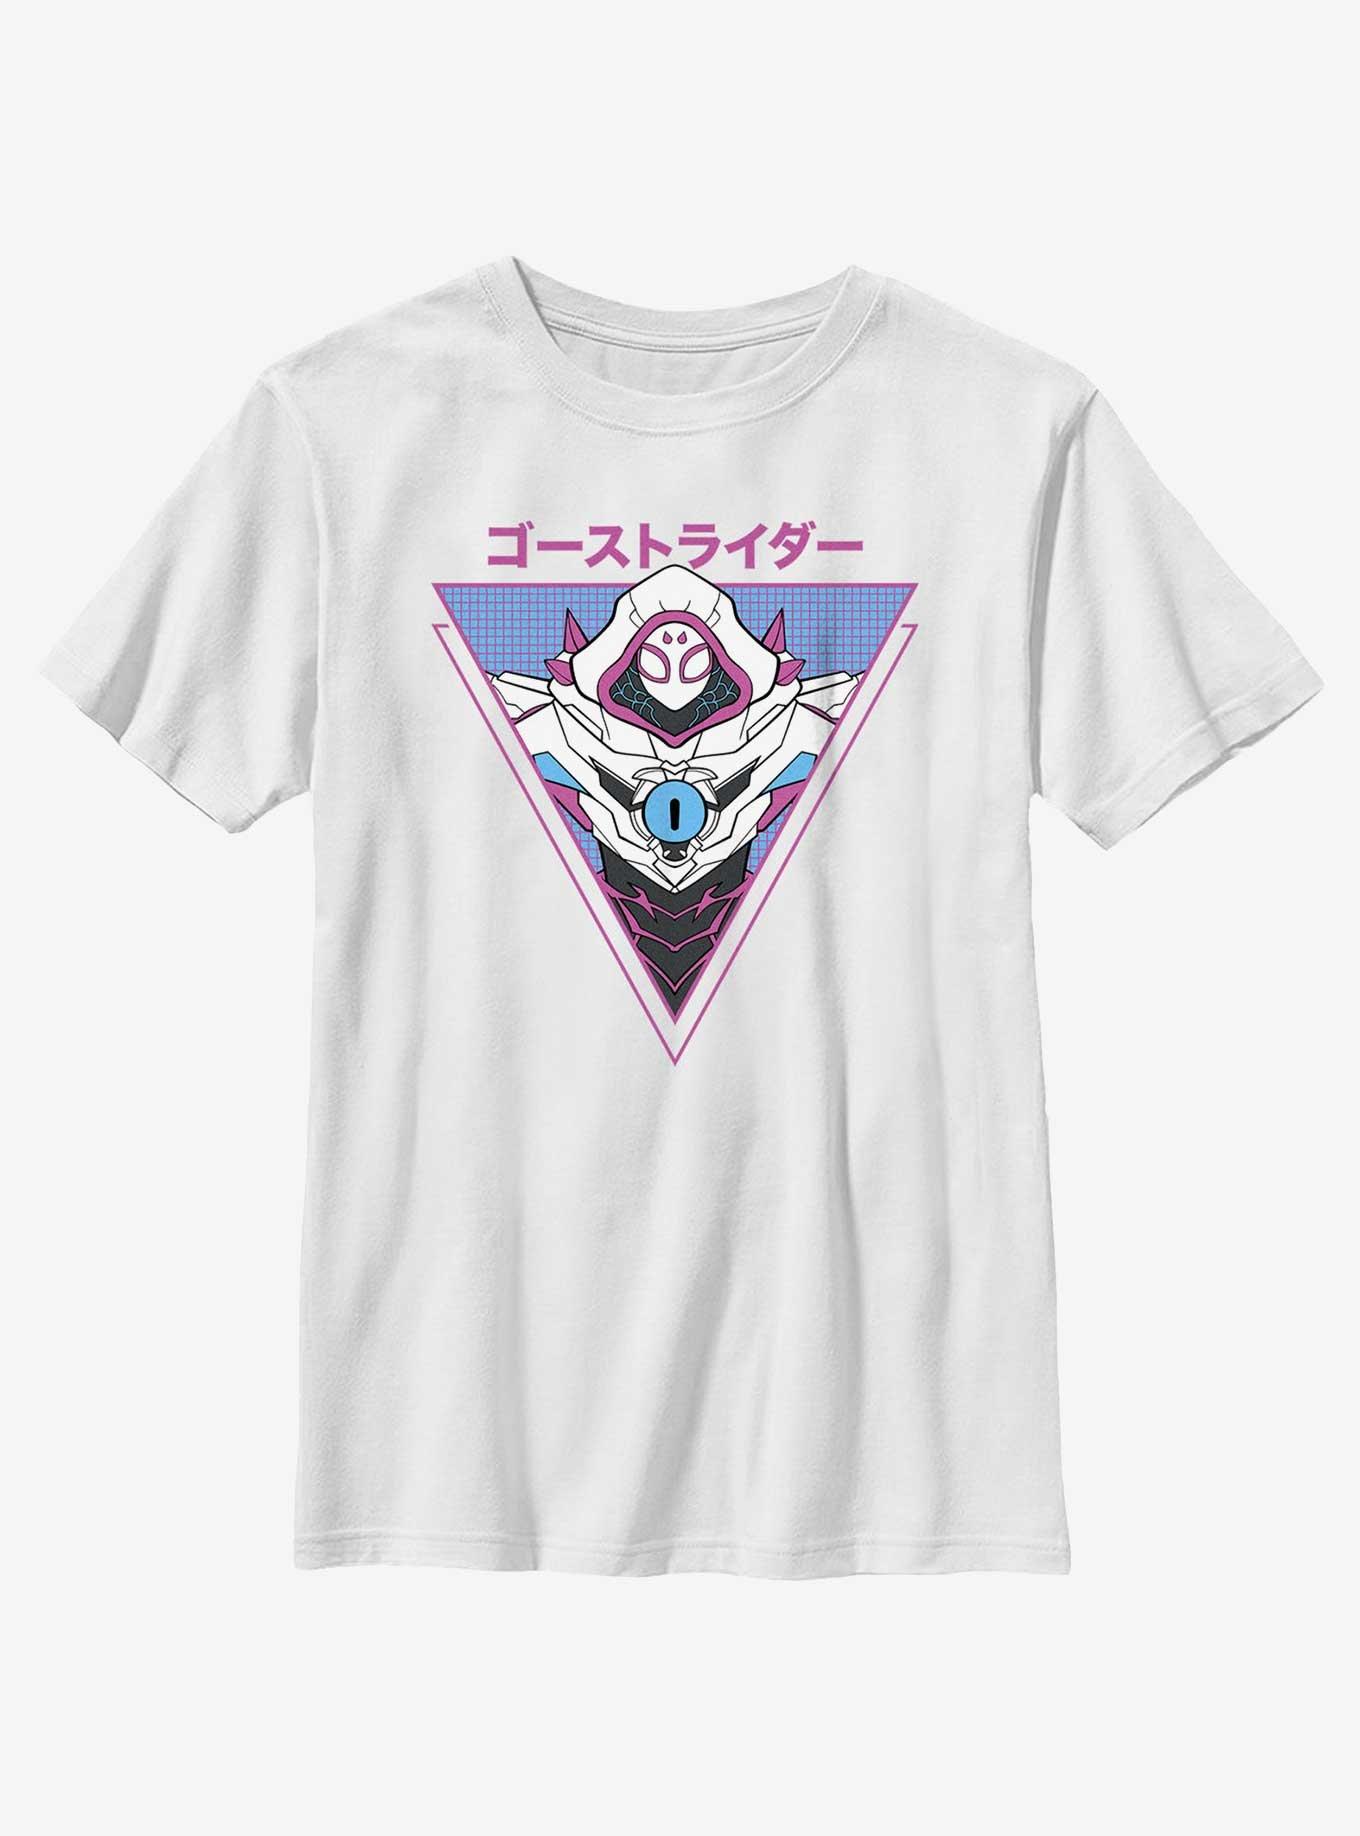 Marvel Avengers Spider Gwen Triangle Japanese Writing Youth T-Shirt, WHITE, hi-res